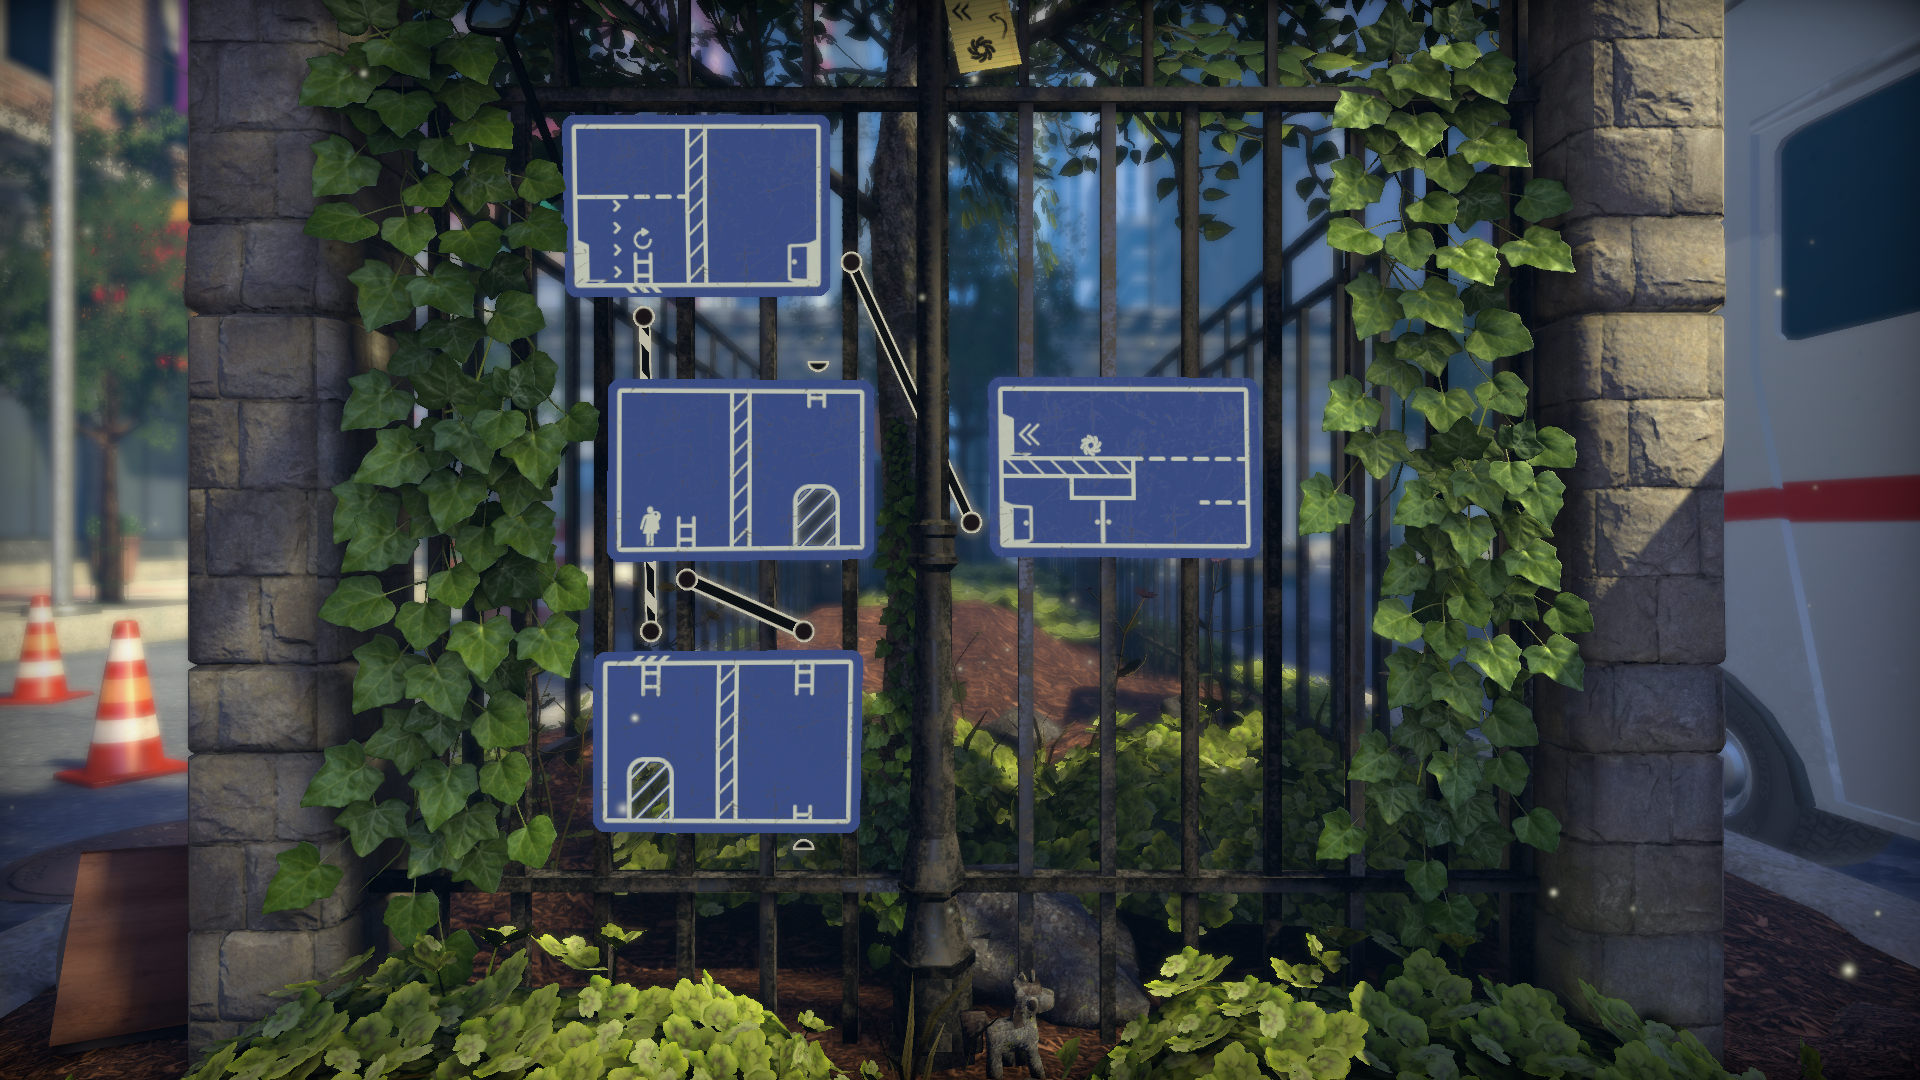 Pedestrian Downtown City Level Puzzle Archway Panels